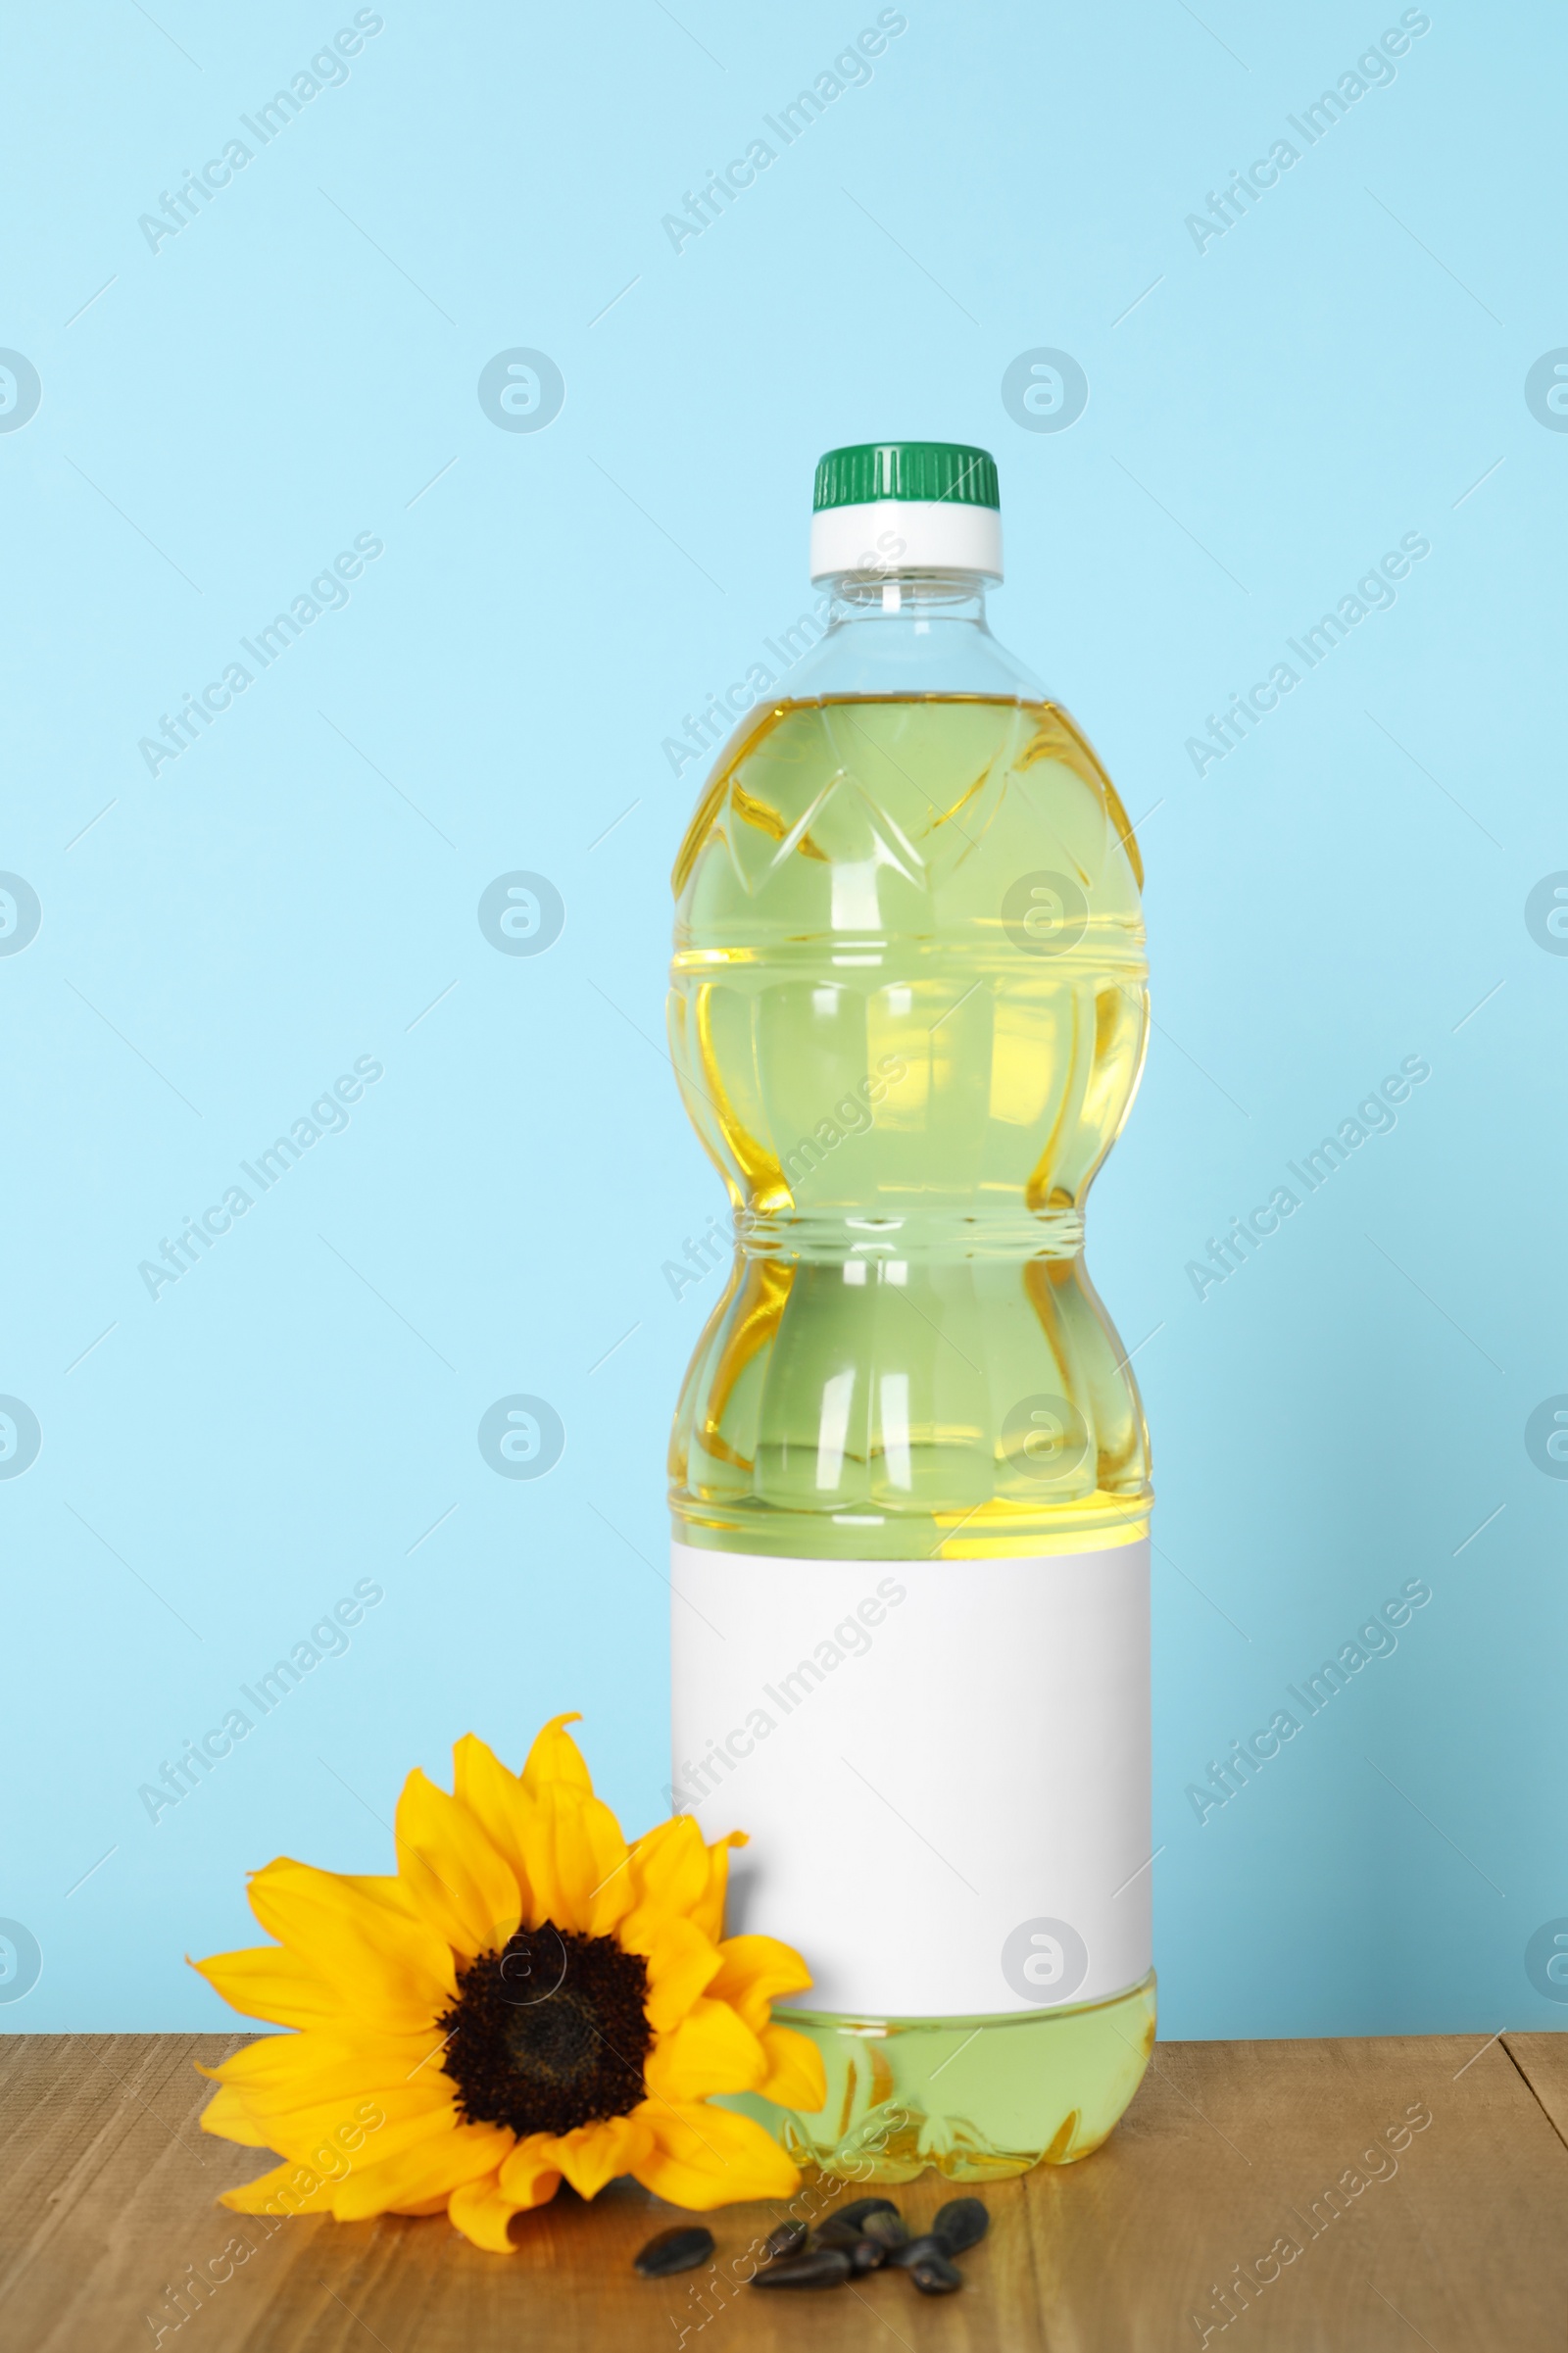 Photo of Bottle of cooking oil, sunflower and seeds on wooden table